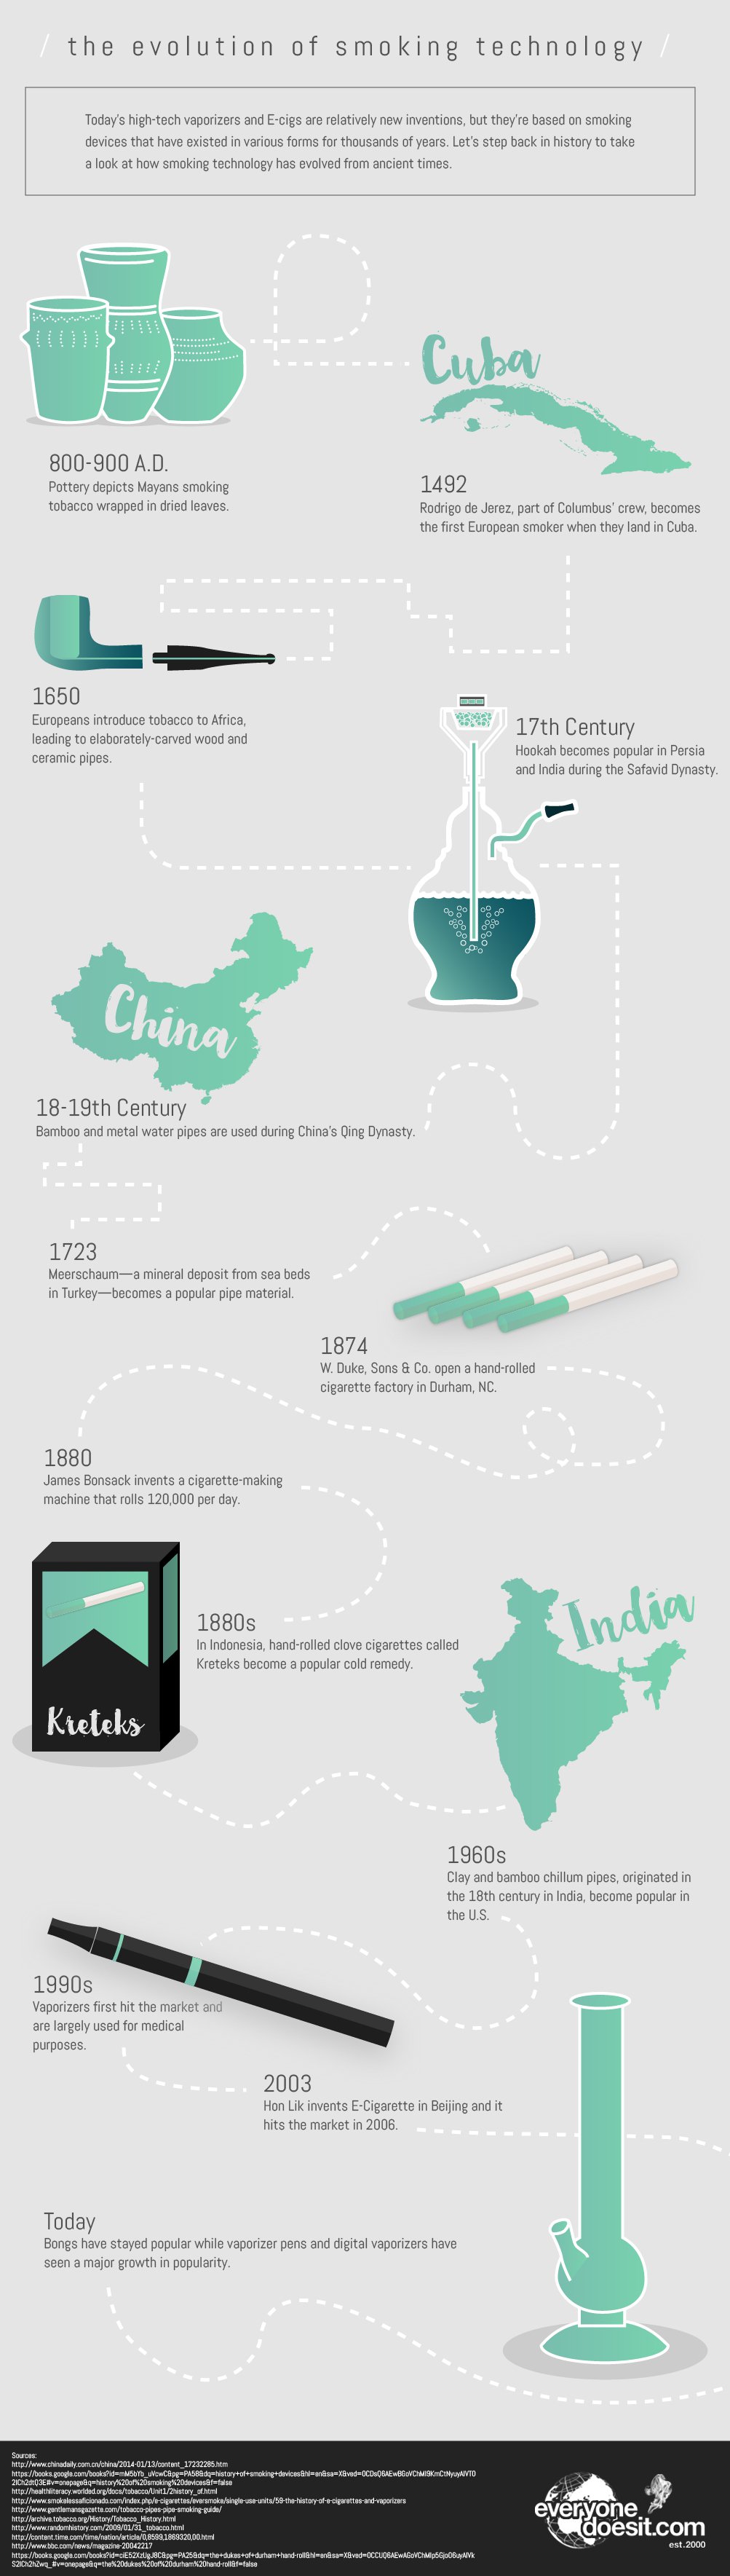 History of Smoking Devices